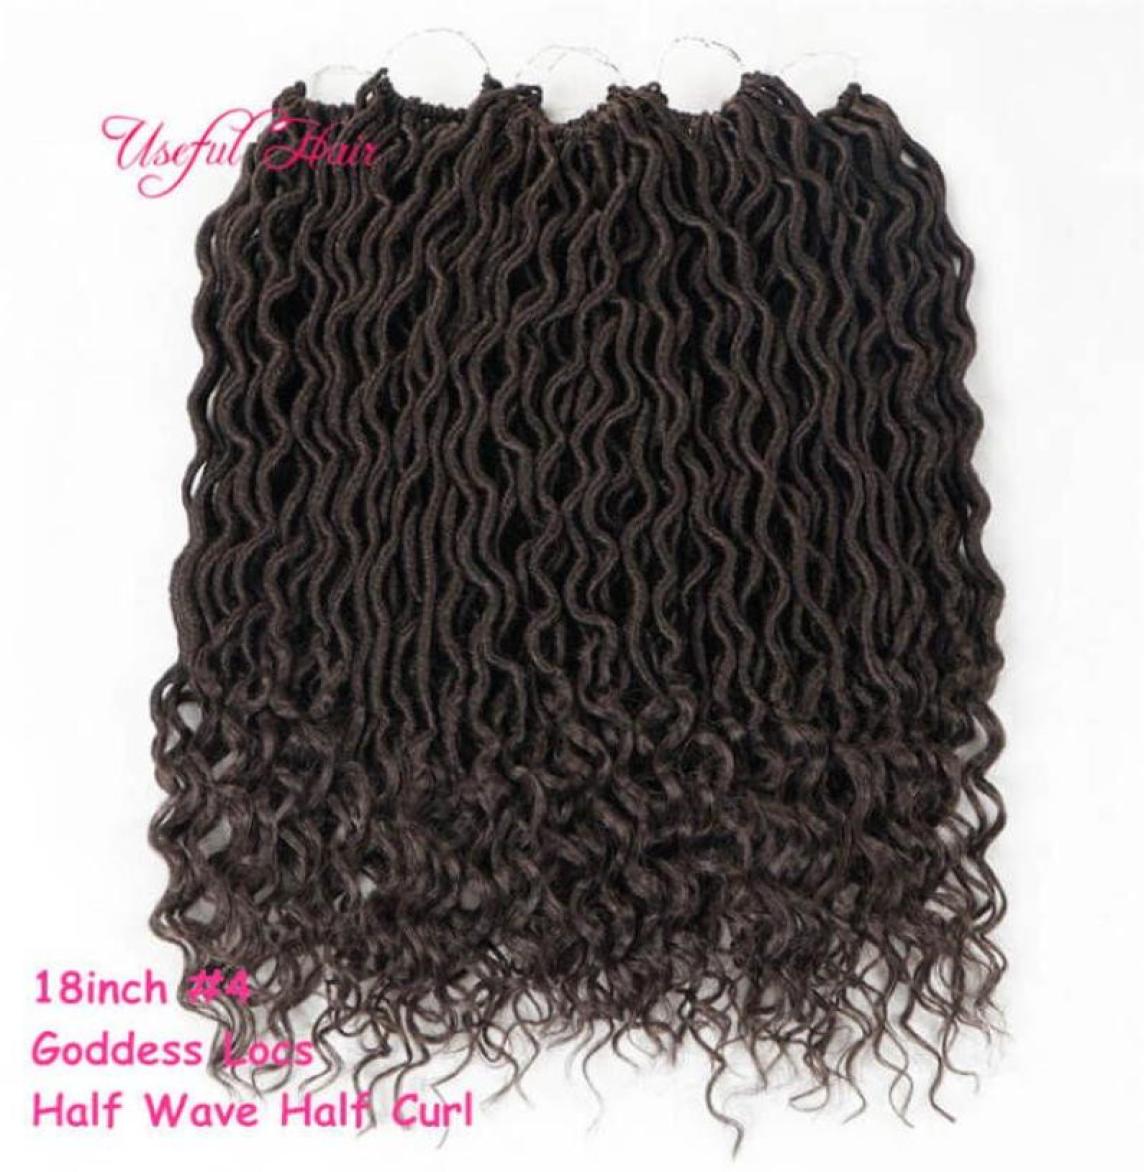 

18 inch Synthetic braiding Crochet Hair goddess locs Faux Locks Curly Crocheted Braids Synthetic Hari Extensions For Black Women m7614267